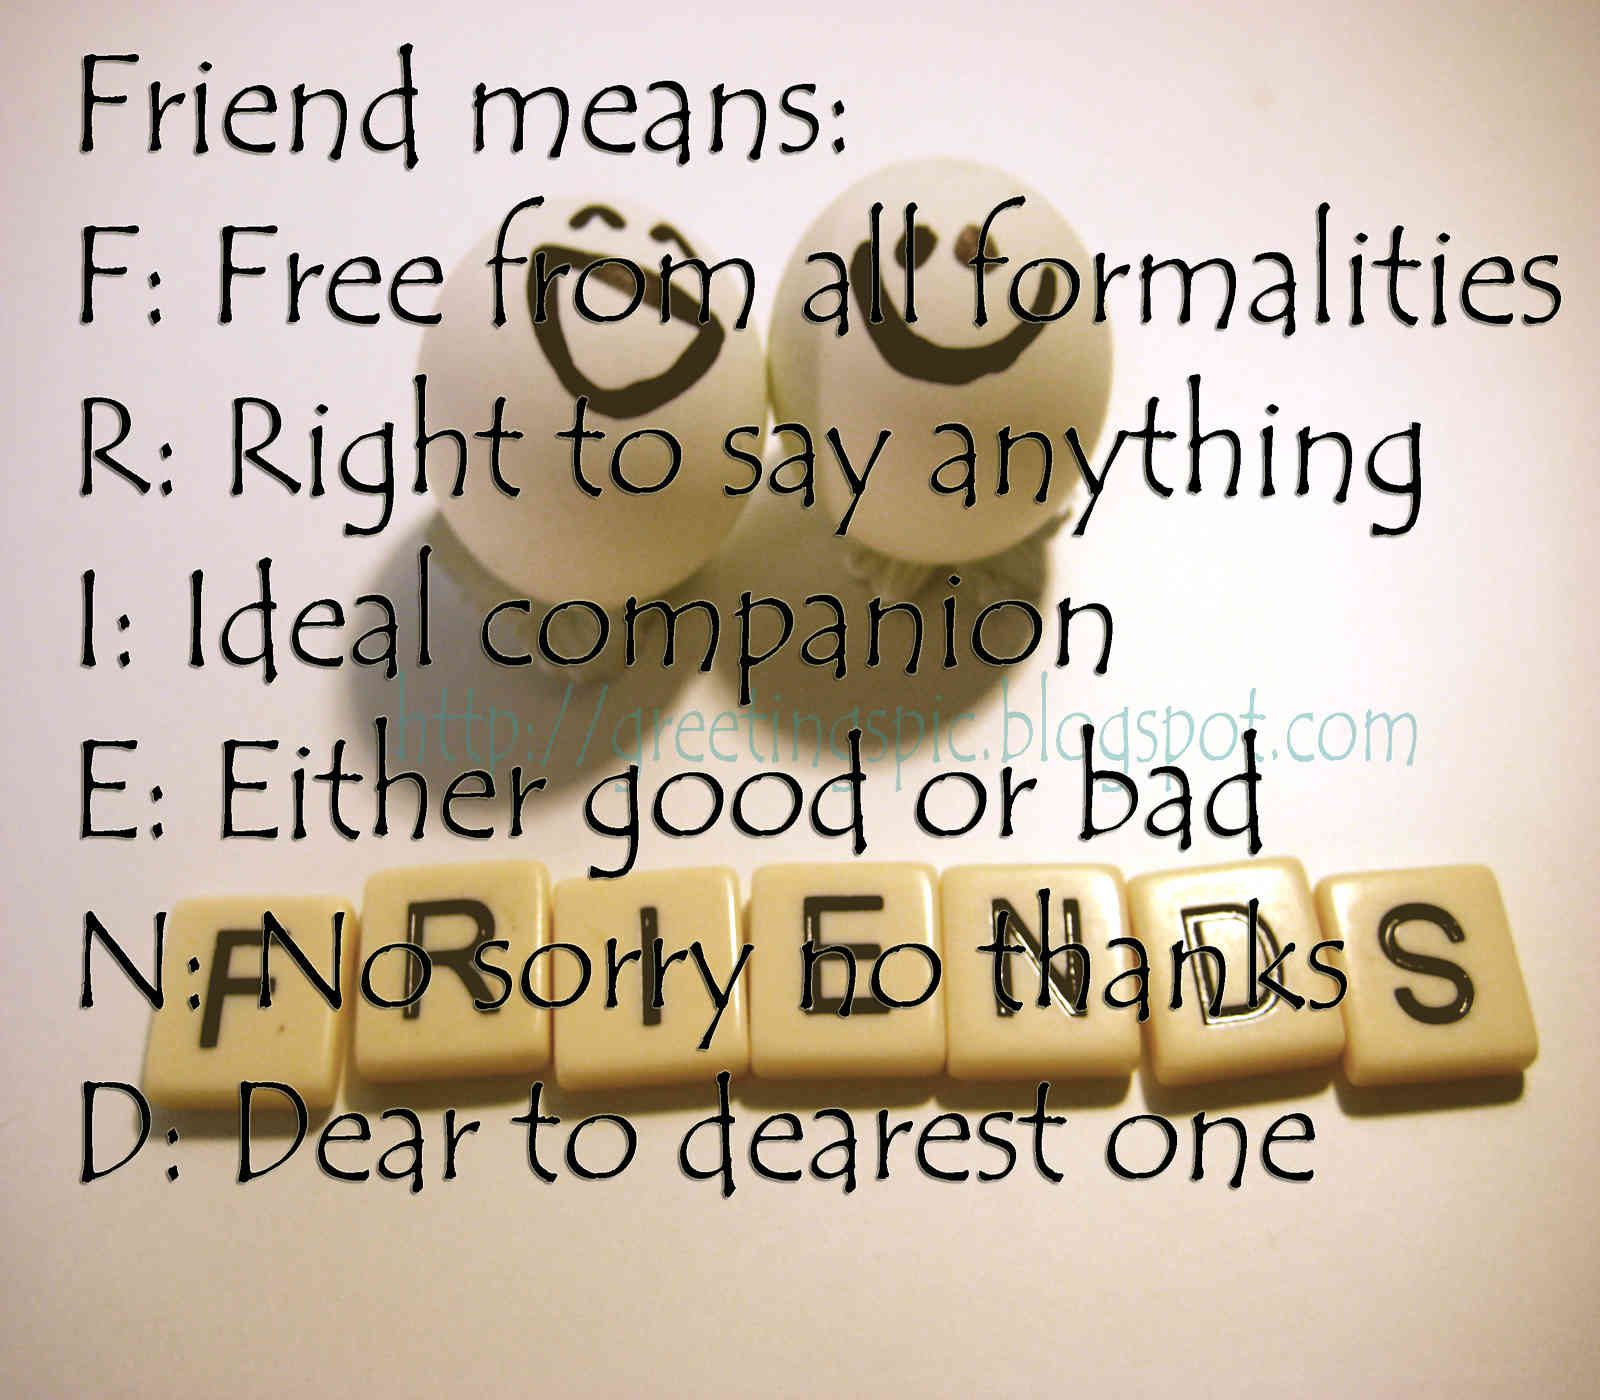 Friendship day quotes with photos ~ Greetings Wishes Images